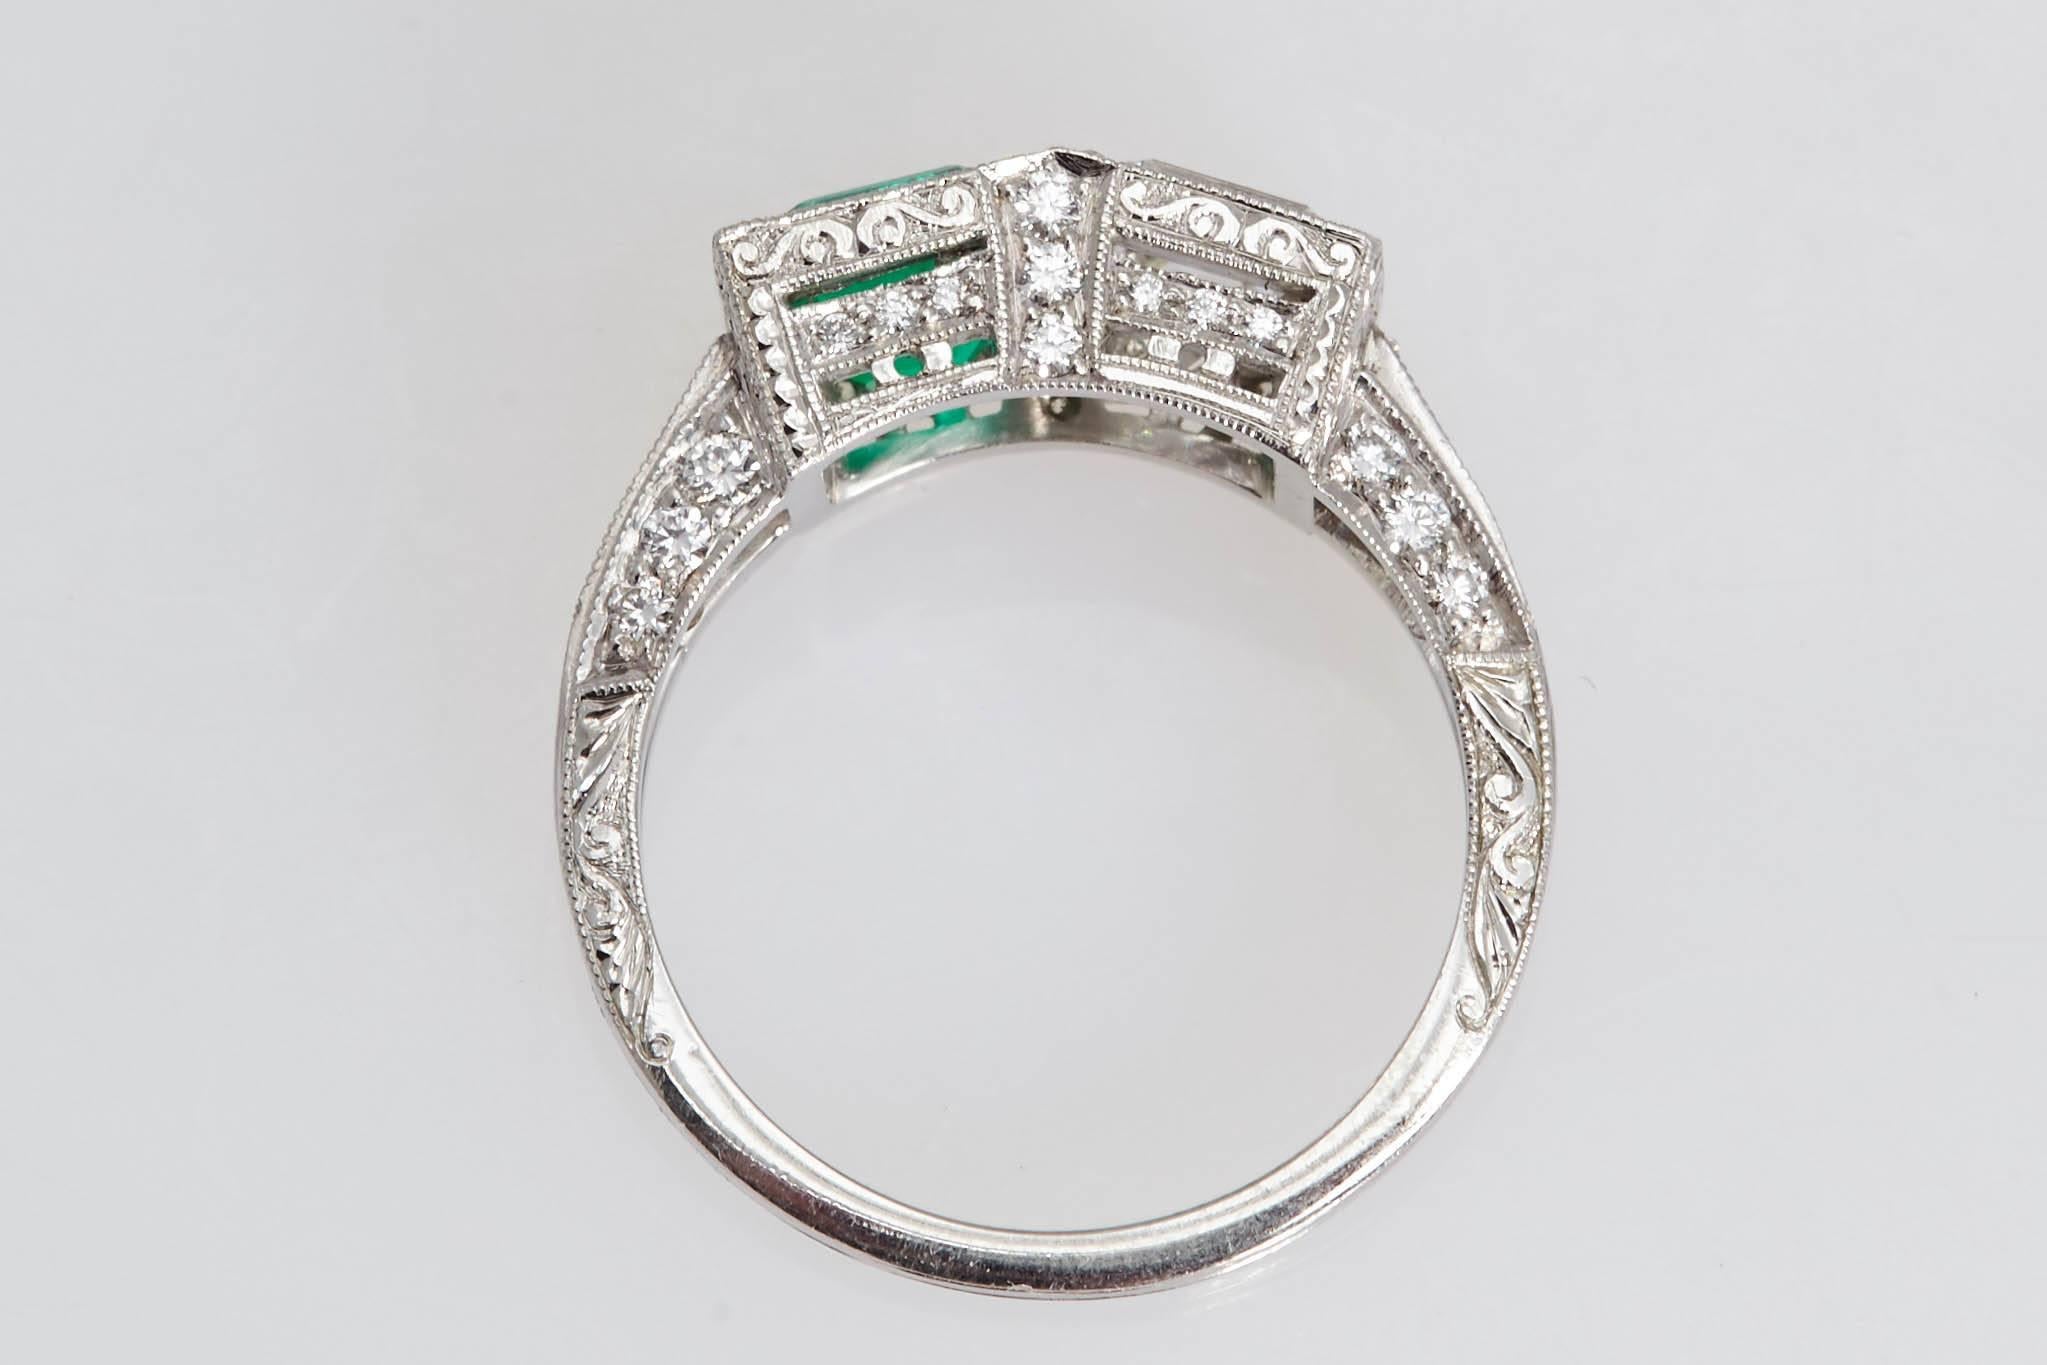 Beautiful two stone platinum ring with a square diamond weighing 1.01 carats and a square Columbian emerald weighing .99 carat.  The diamond has a certificate from the Gemological Institute of America stating that it is "G" in color and